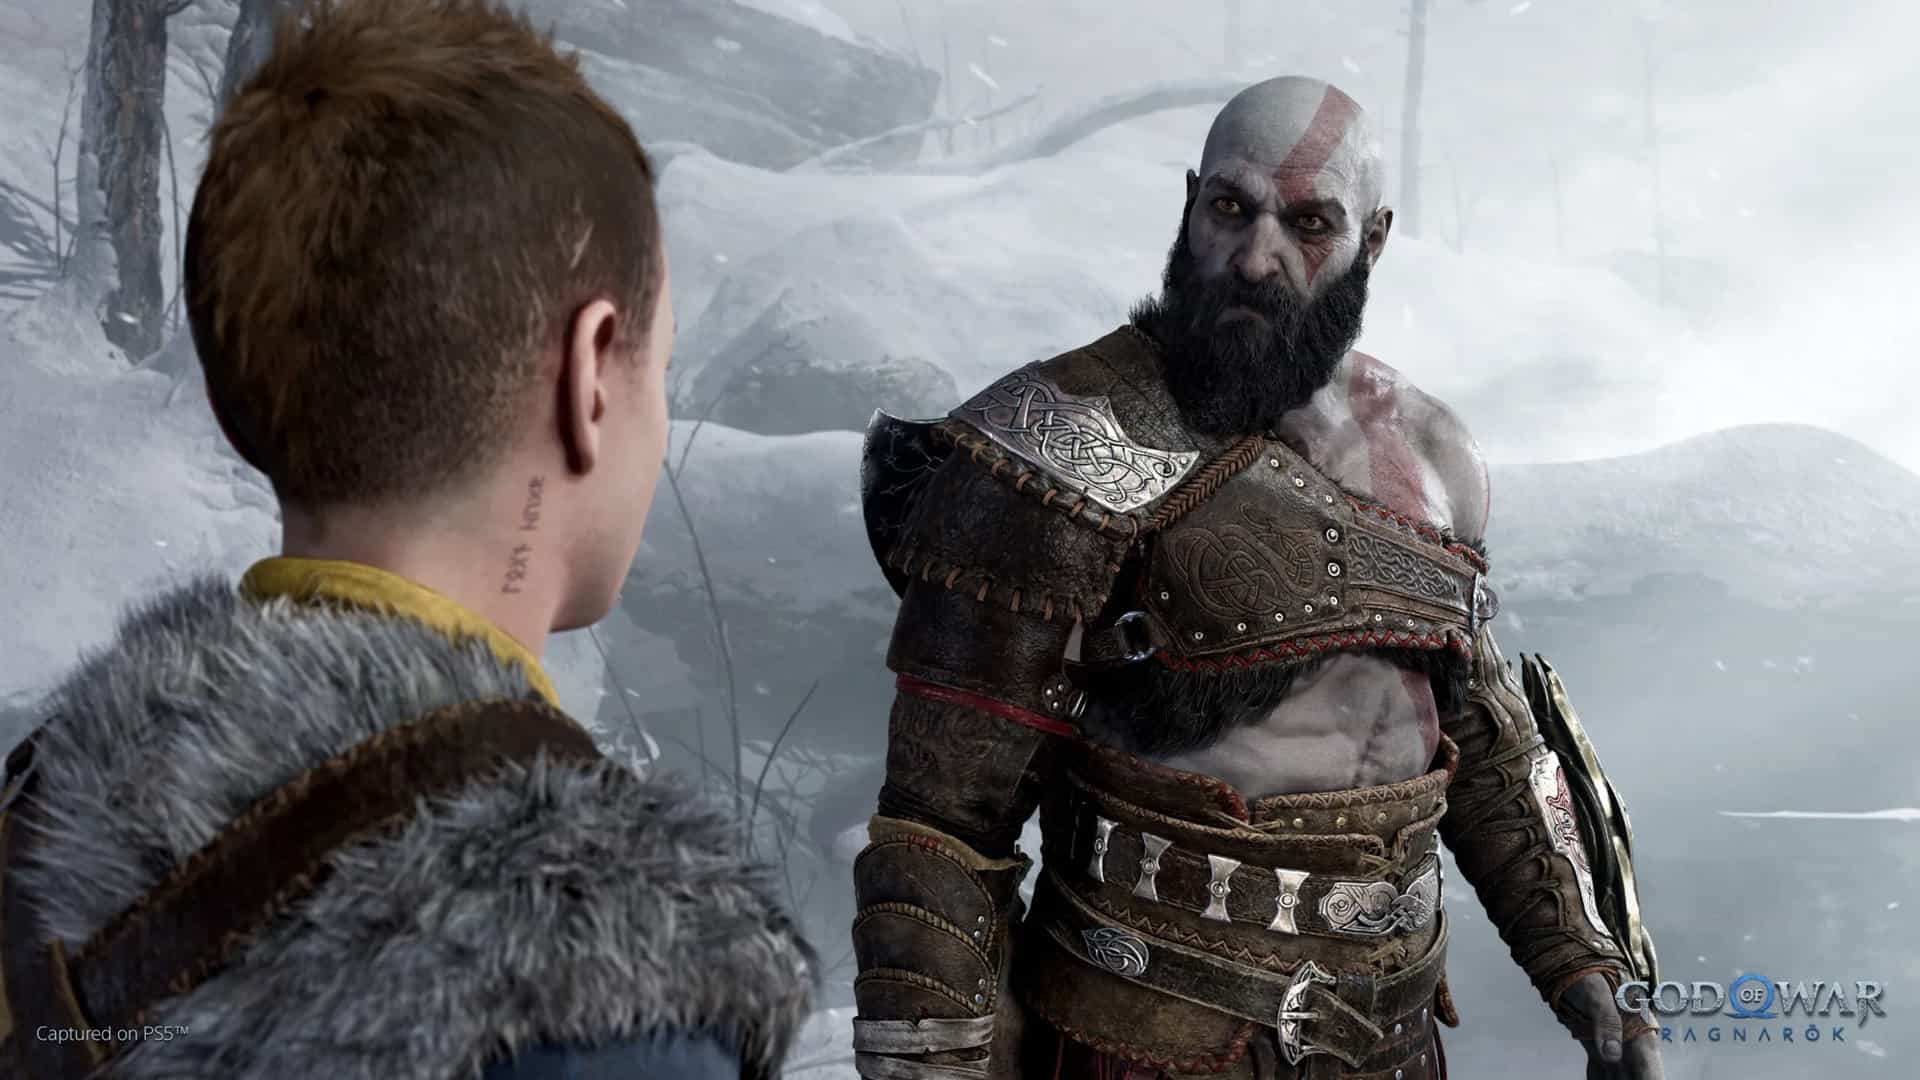 God of War Ragnarok release time – UK, US and when GOW unlocks in other regions